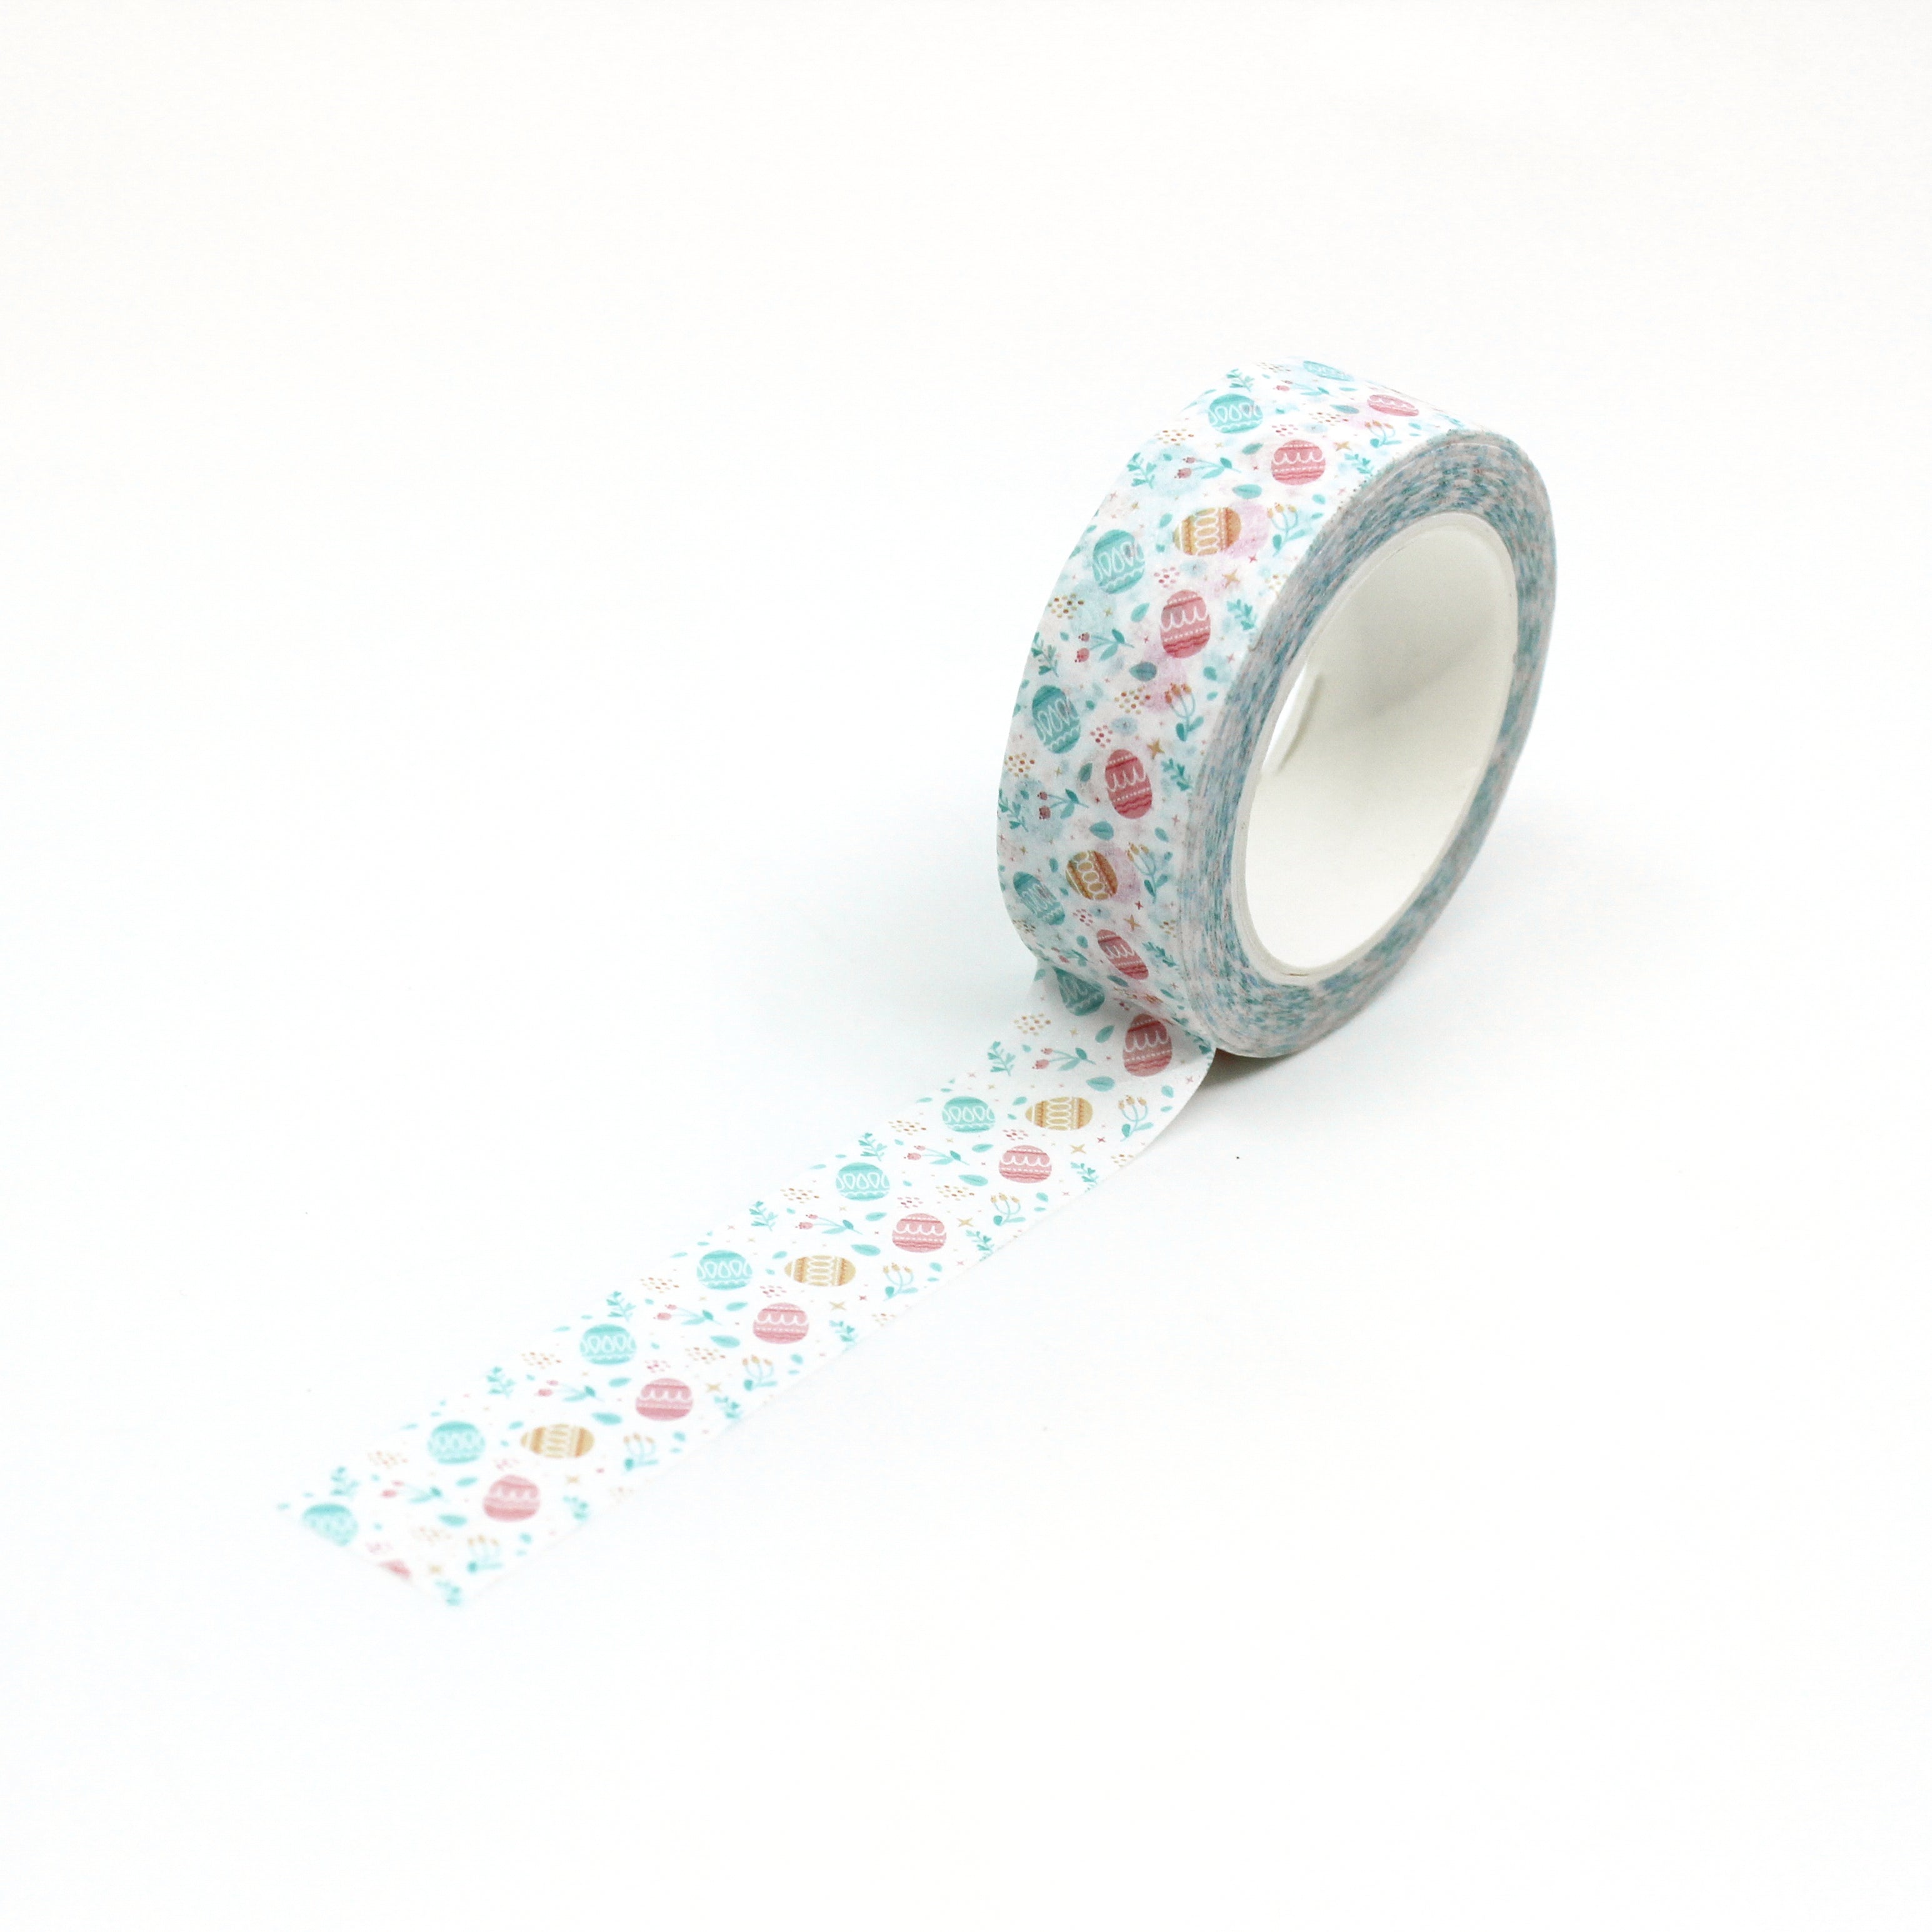 Add a festive touch to your Easter crafts with our Pastel Easter Eggs Washi Tape. This delightful tape features a variety of colorful pastel Easter eggs, perfect for decorating cards, scrapbook pages, and more. Celebrate the season with this charming tape! This tape is sold at BBB Supplies Craft Shop.